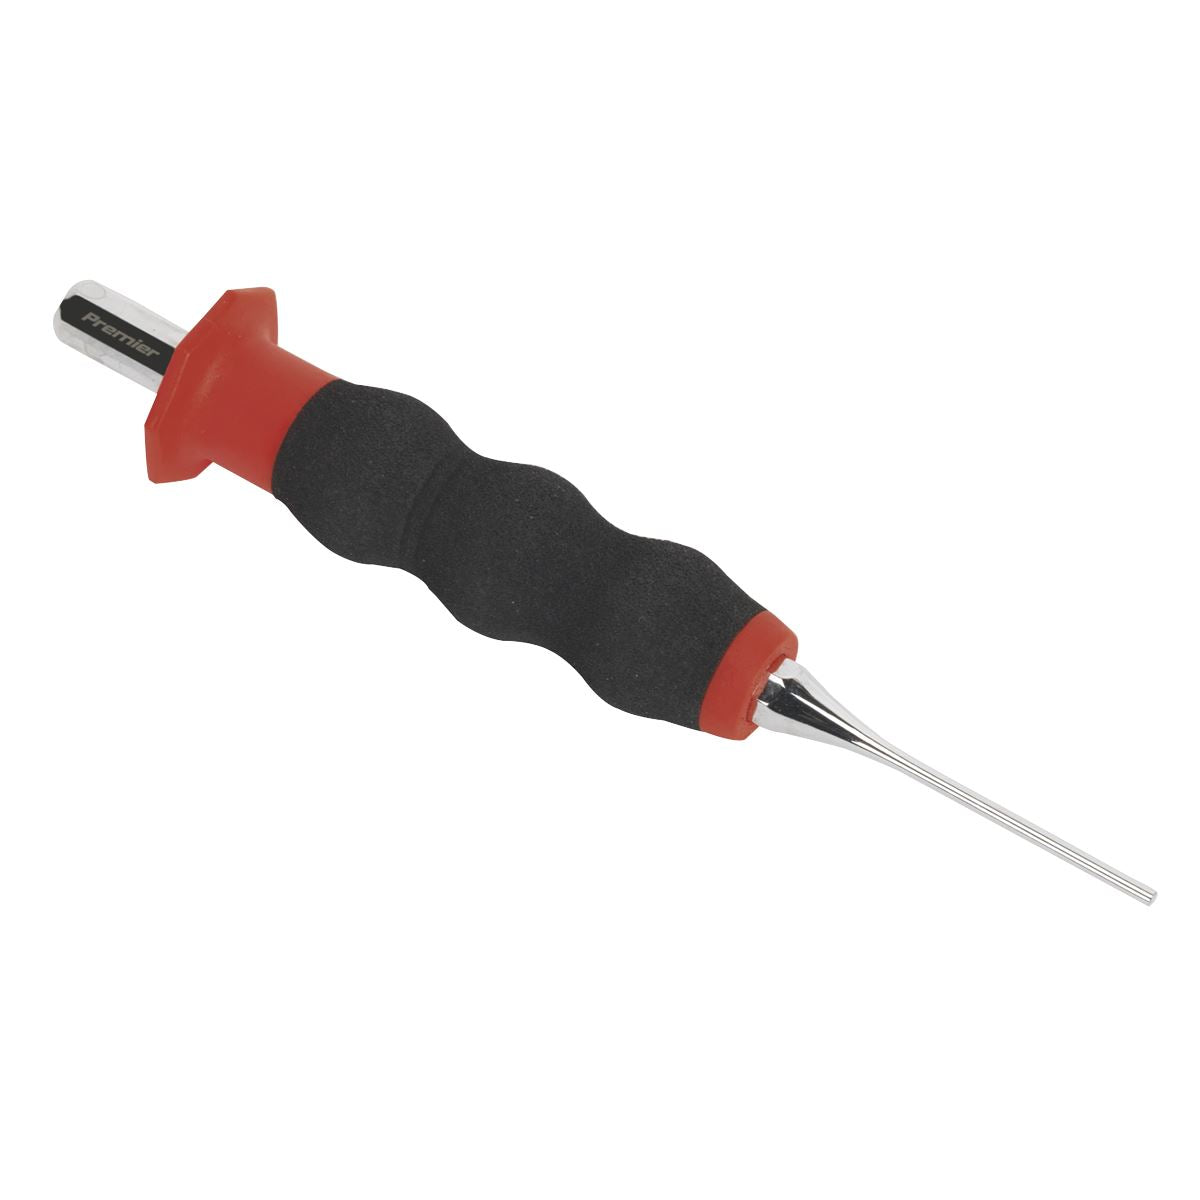 Sealey Premier Sheathed Parallel Pin Punch Ø2mm